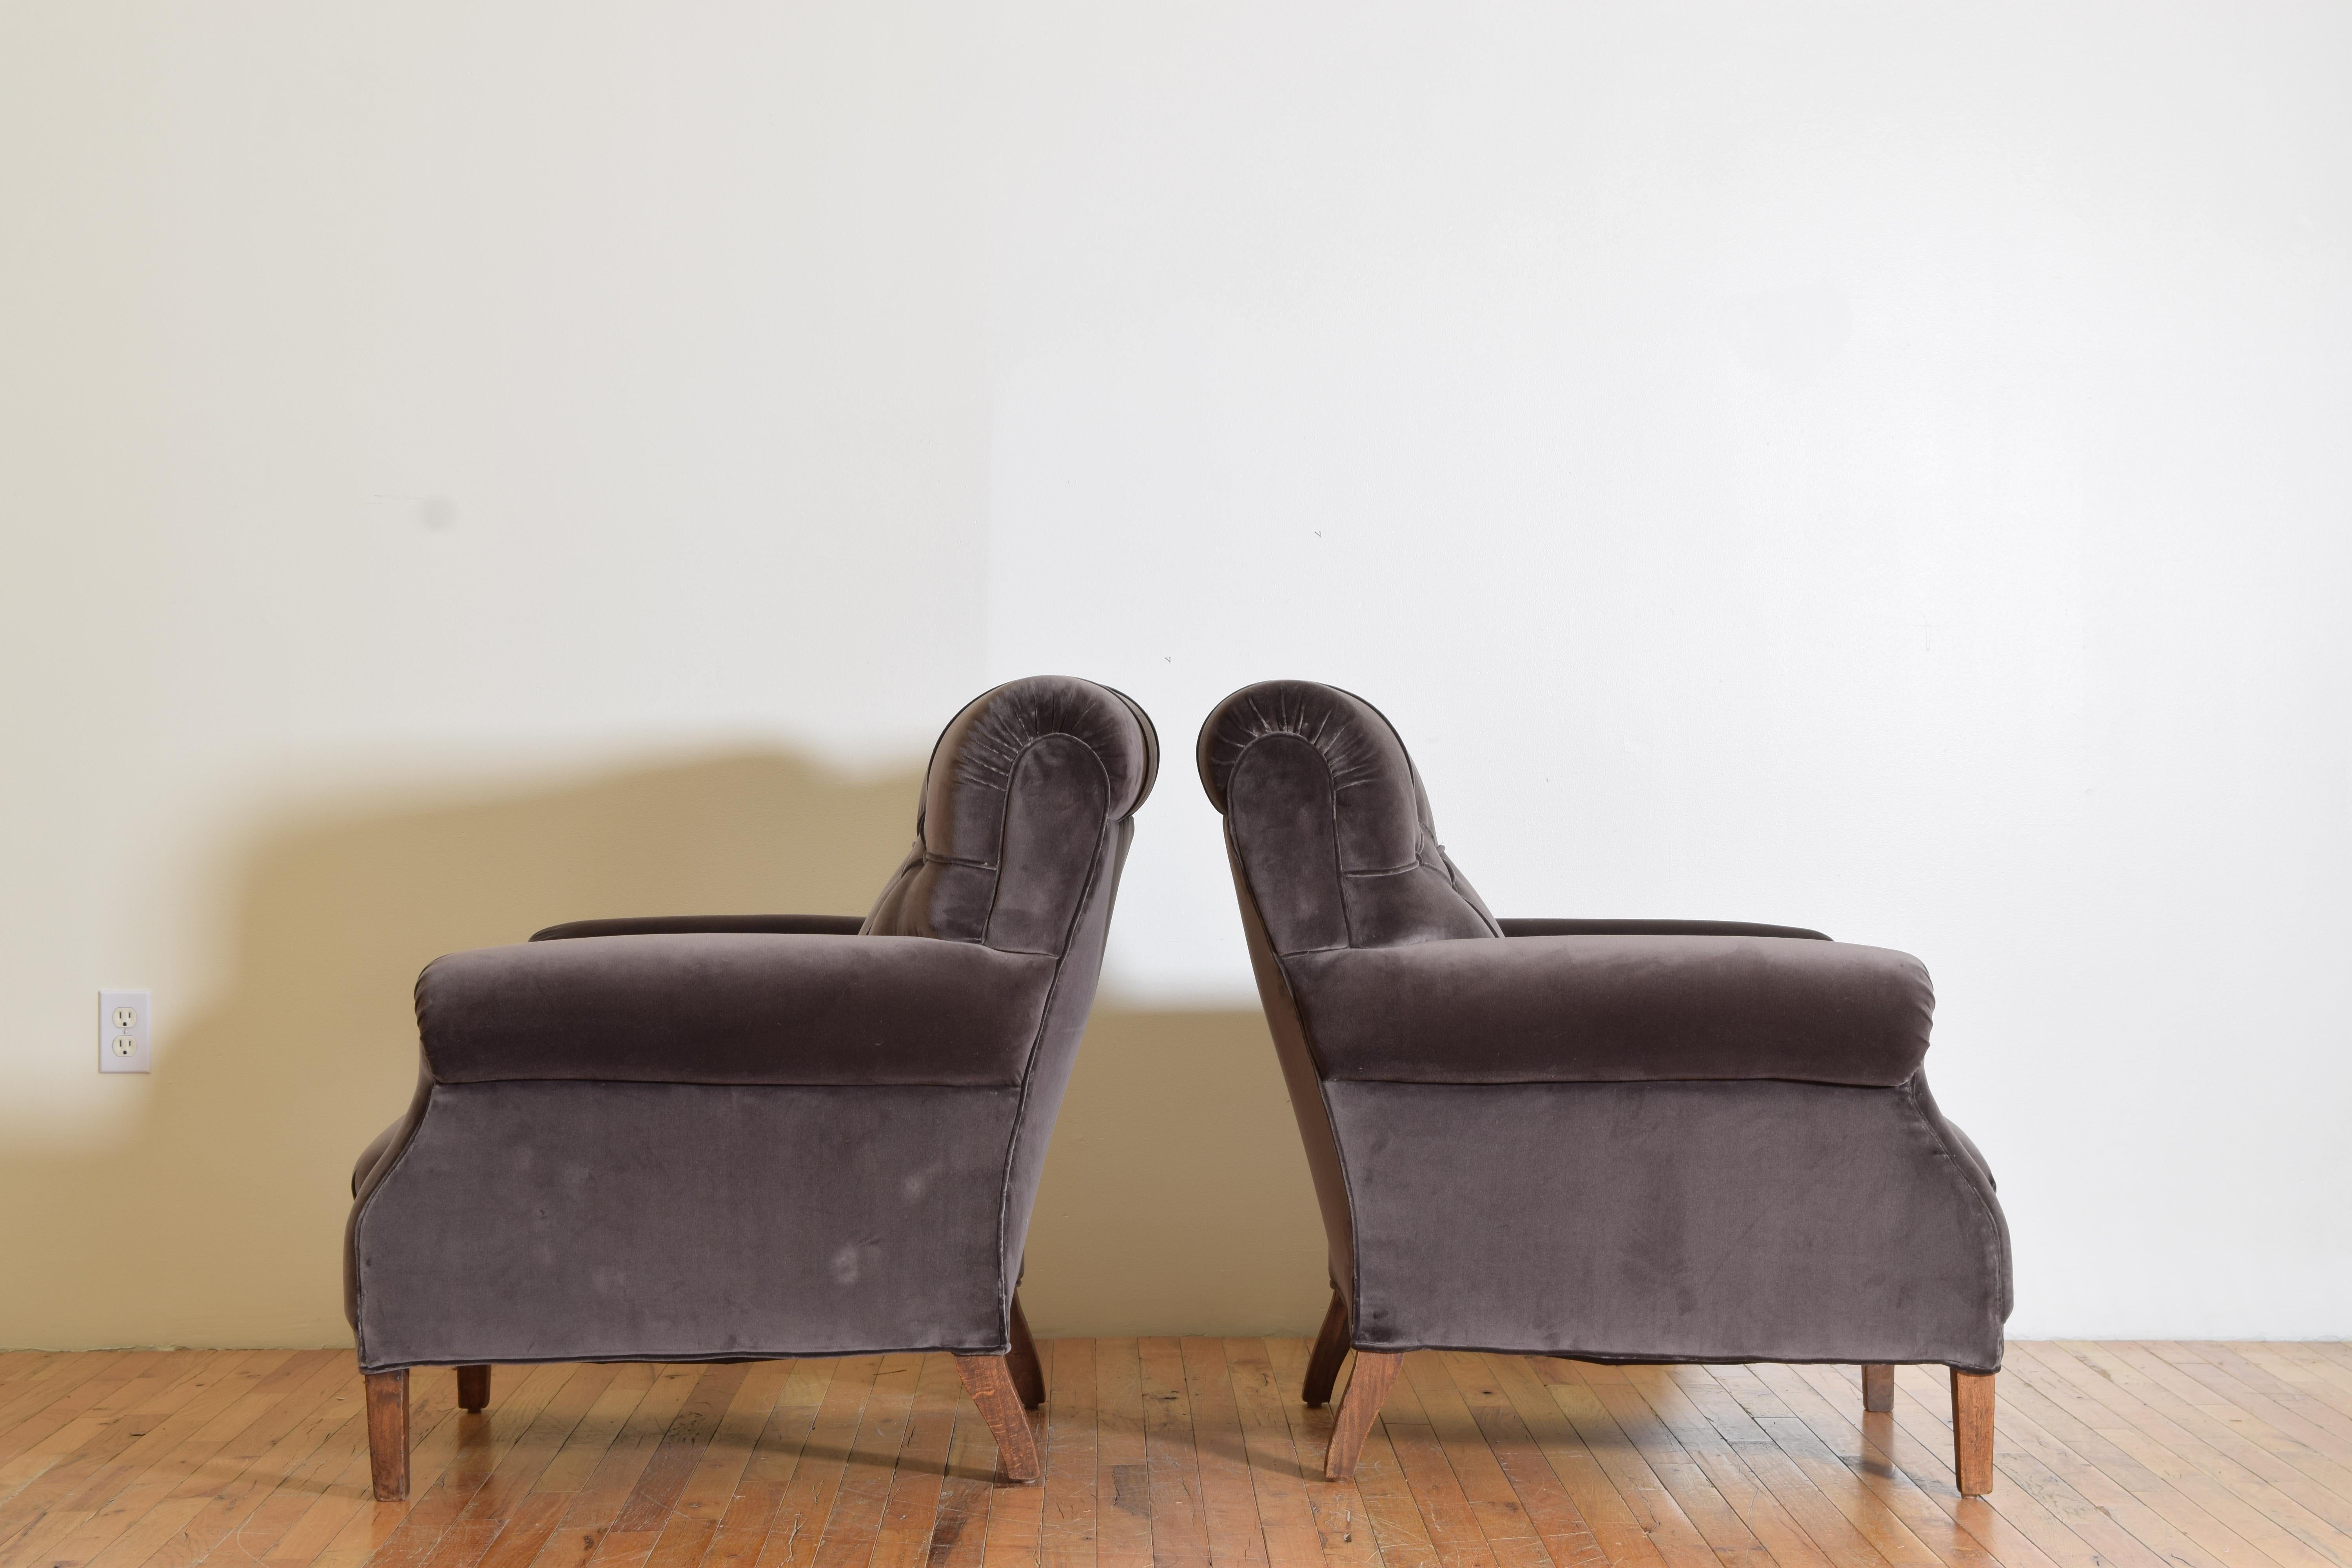 Pair Italian Poltrona Frau Velvet Upholstered Club Chairs, 2ndq 20th Century In Excellent Condition For Sale In Atlanta, GA